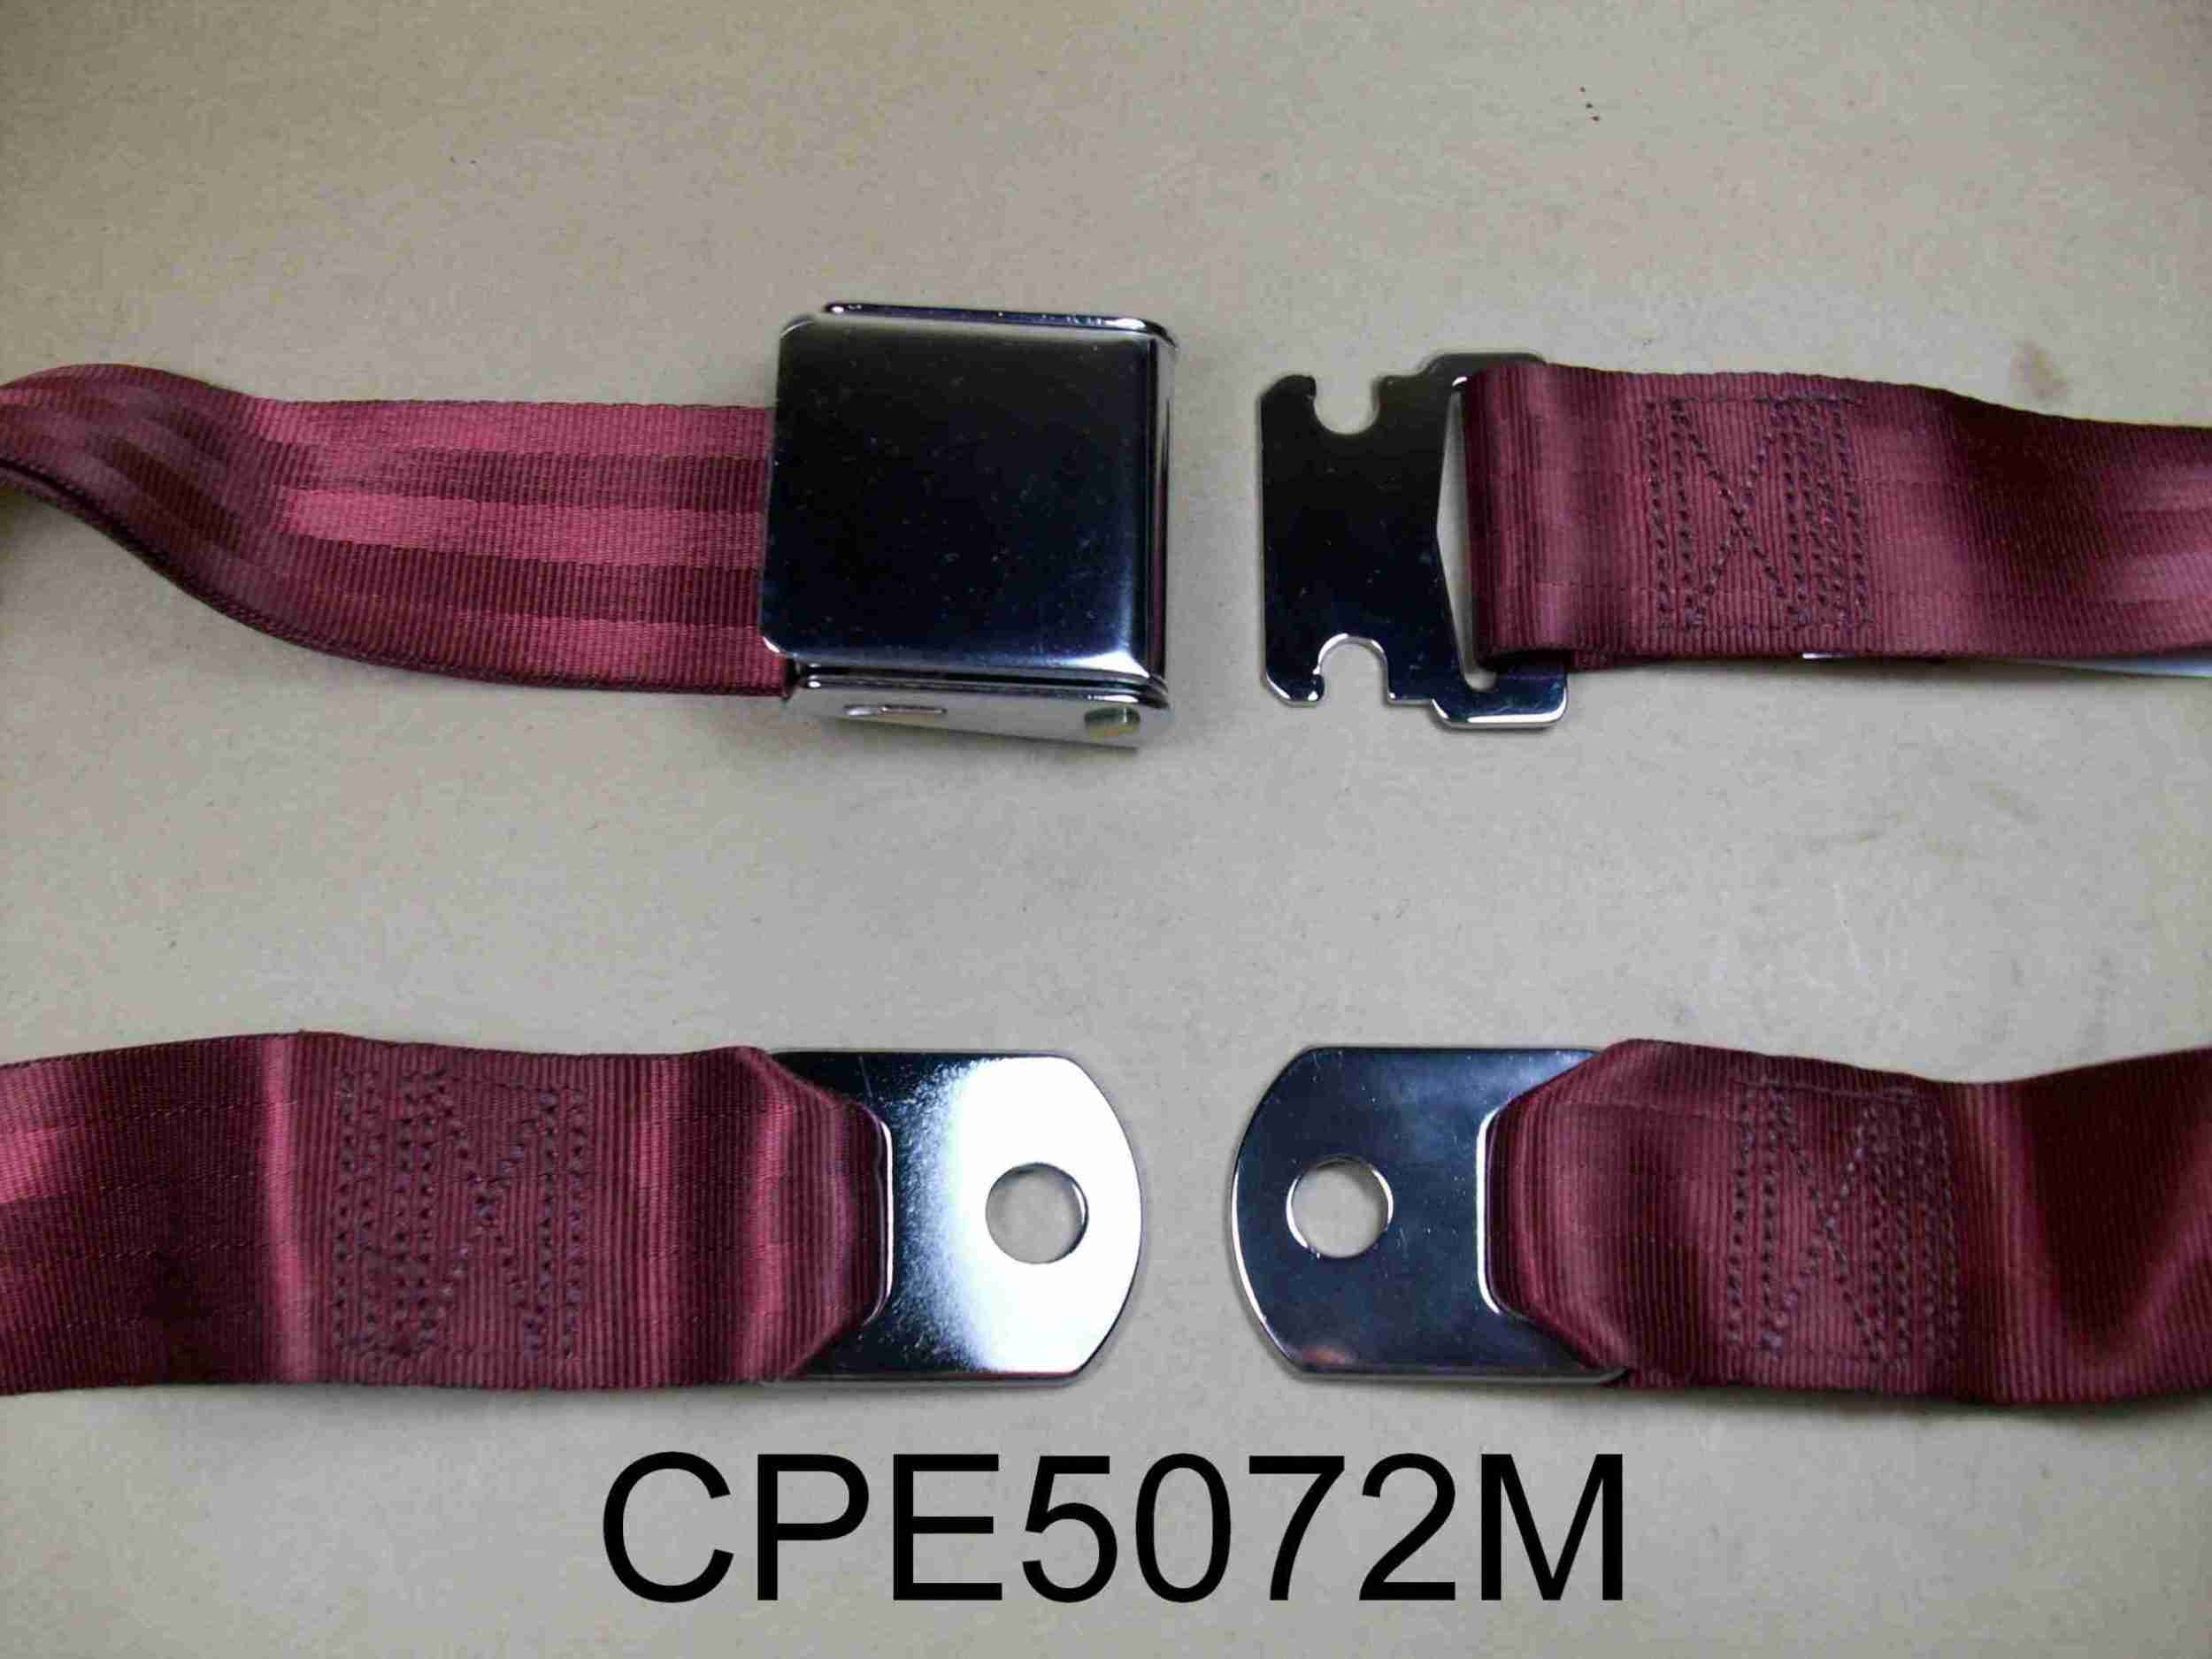 1926-65 75" Maroon Seat Belt w/ Chrome Aircraft-Style Buckle, 2-point non-retractable lap belt, comes w/ hardware